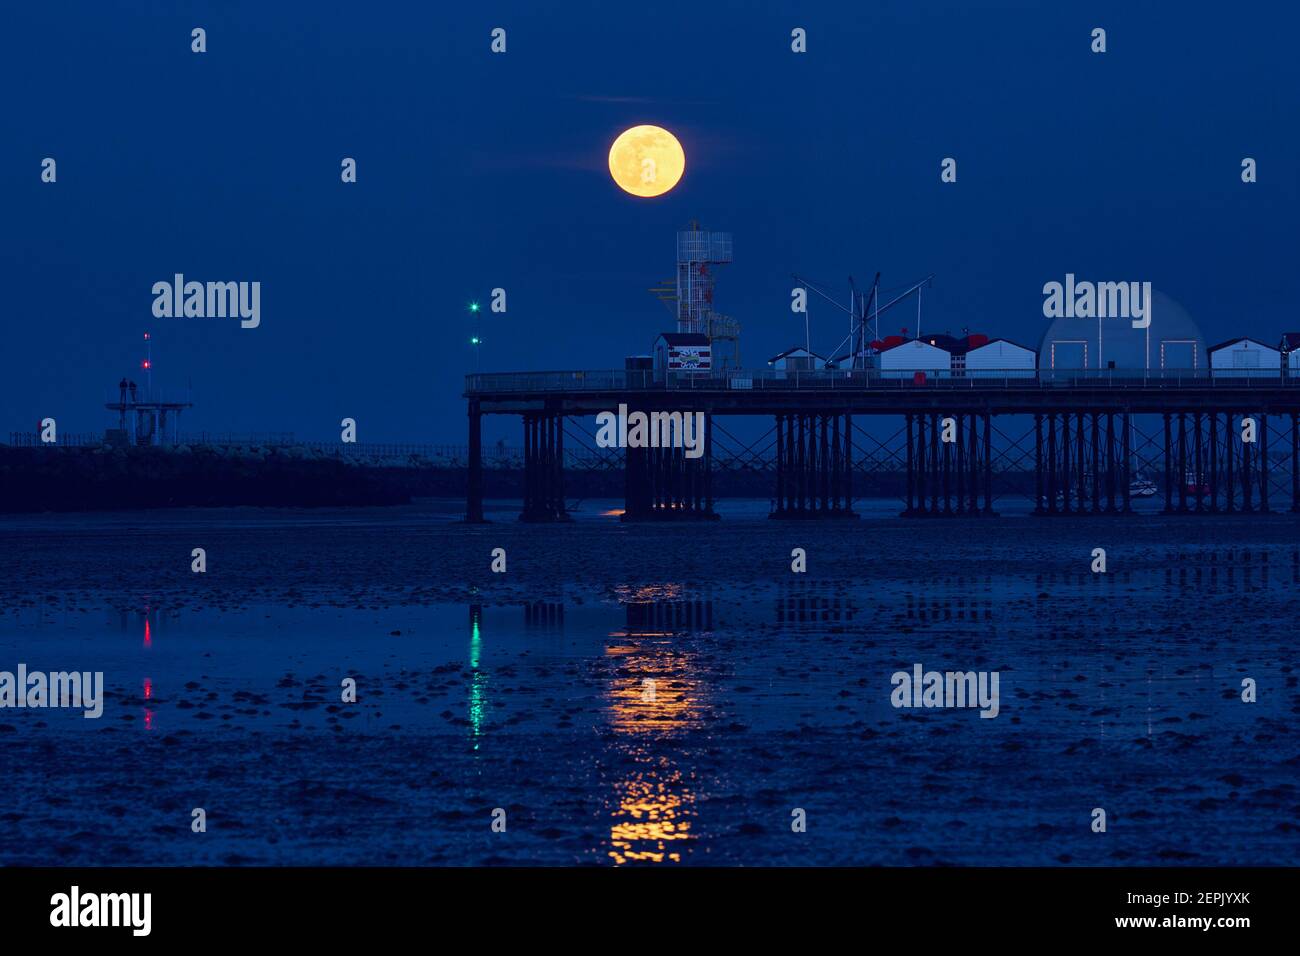 Herne Bay, Kent, UK. 27th February 2021: UK Weather. Waning Gibbous moon rises into a clear sky over Herne Bay pier at the end of a fine day, during the blue hour after sunset. Credit: Alan Payton/Alamy Live News Stock Photo